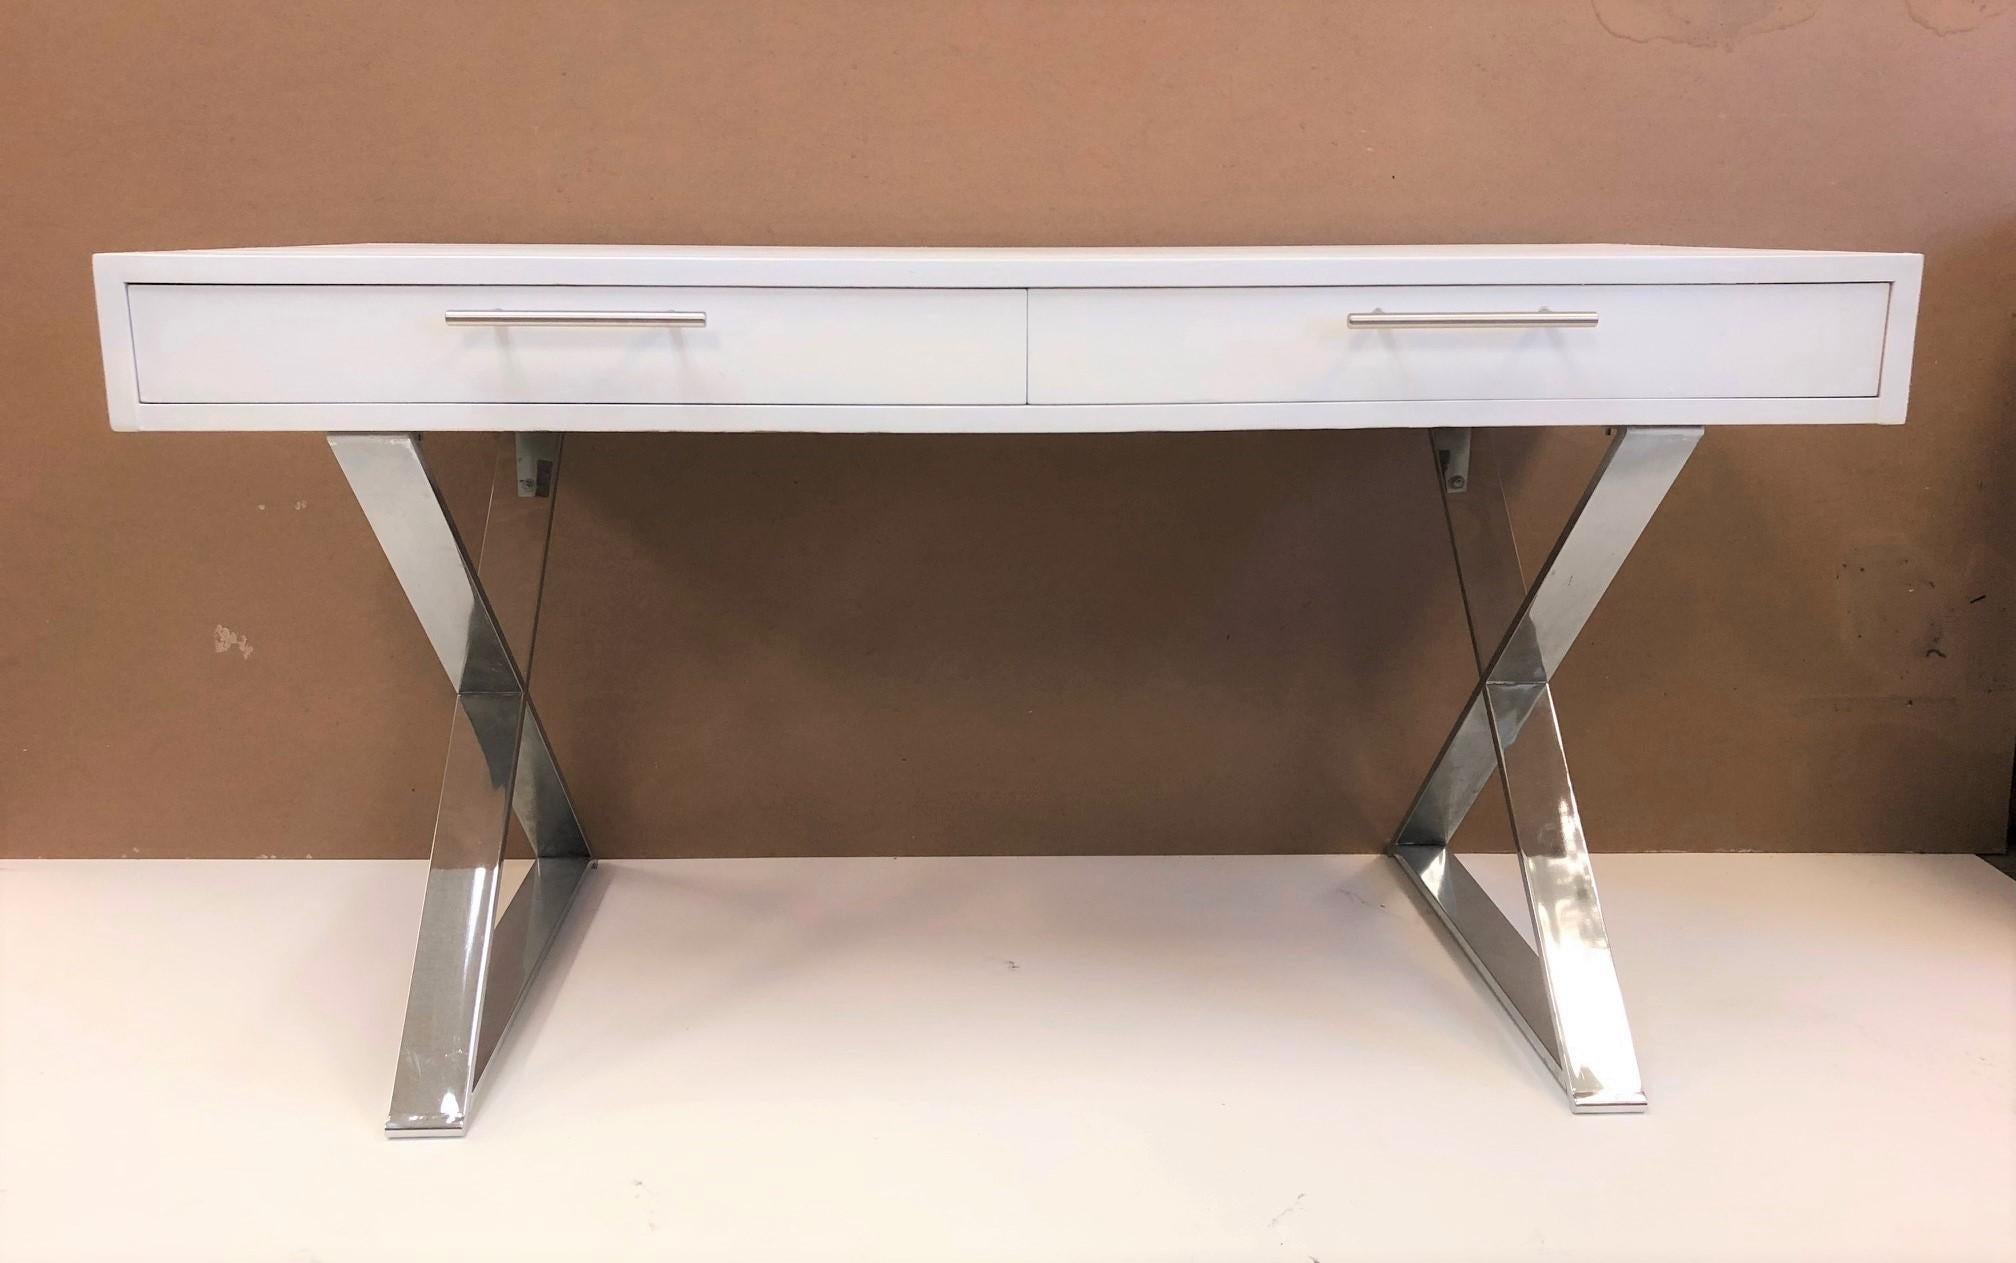 Milo Baughman style desk. The desk has a white painted finish, chrome X base, and two pull out drawers. Handles are chrome as well. Leg room is 23H.